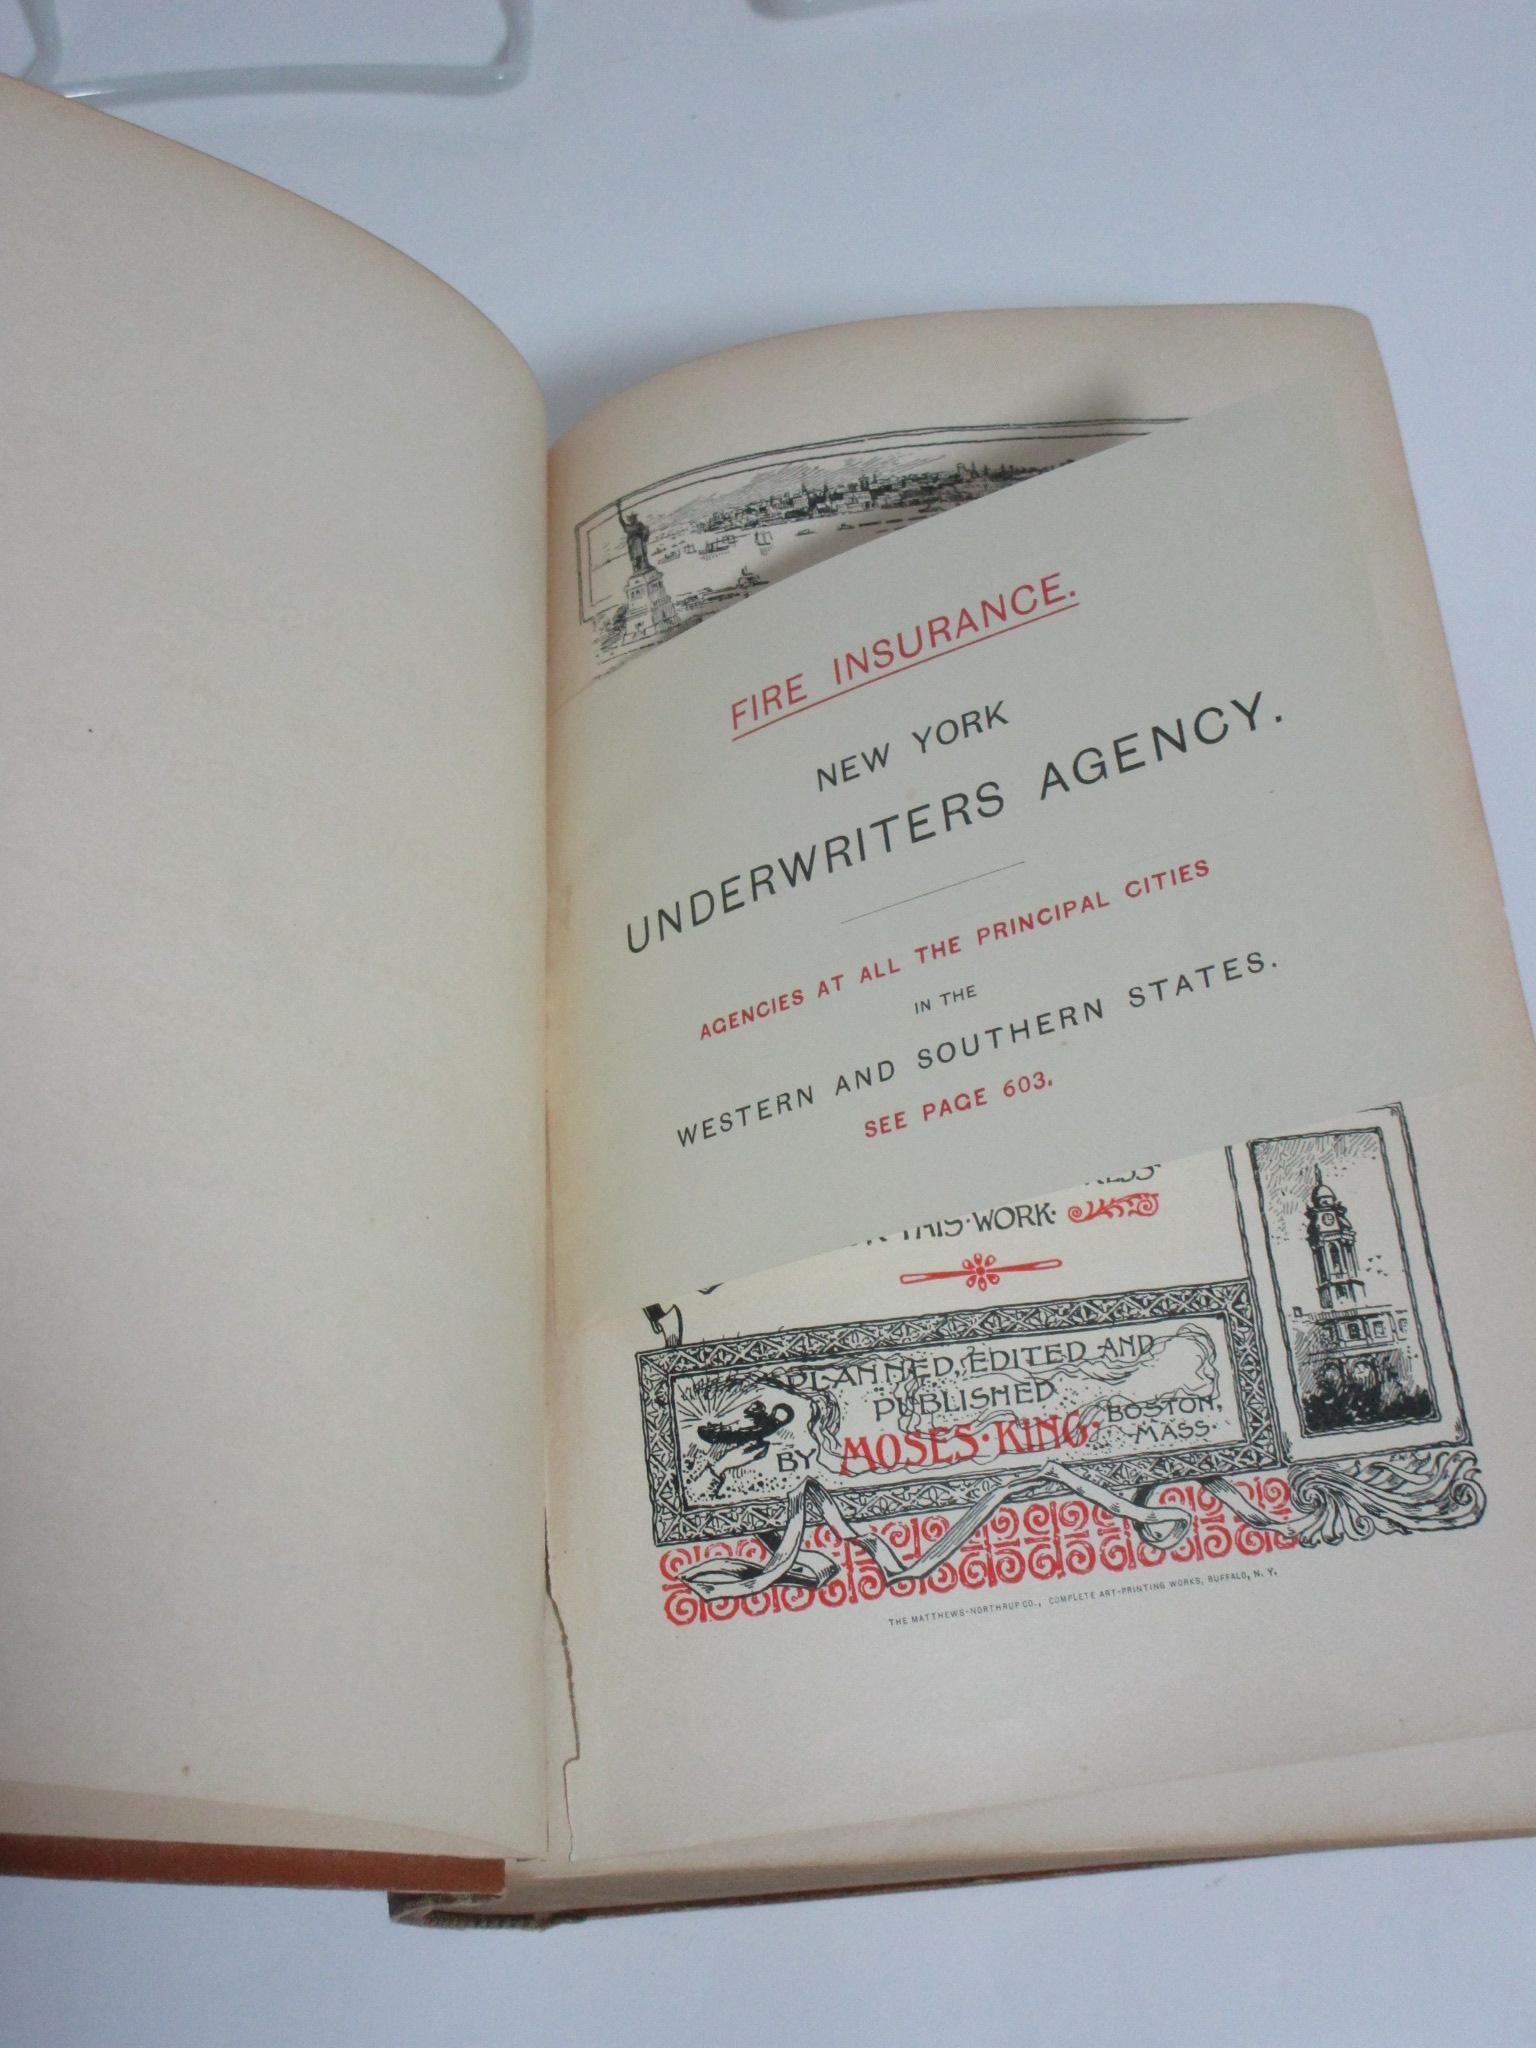 King's Handbook of New York City w/Over 800 Illustrations w/Ad for Fire Insurance